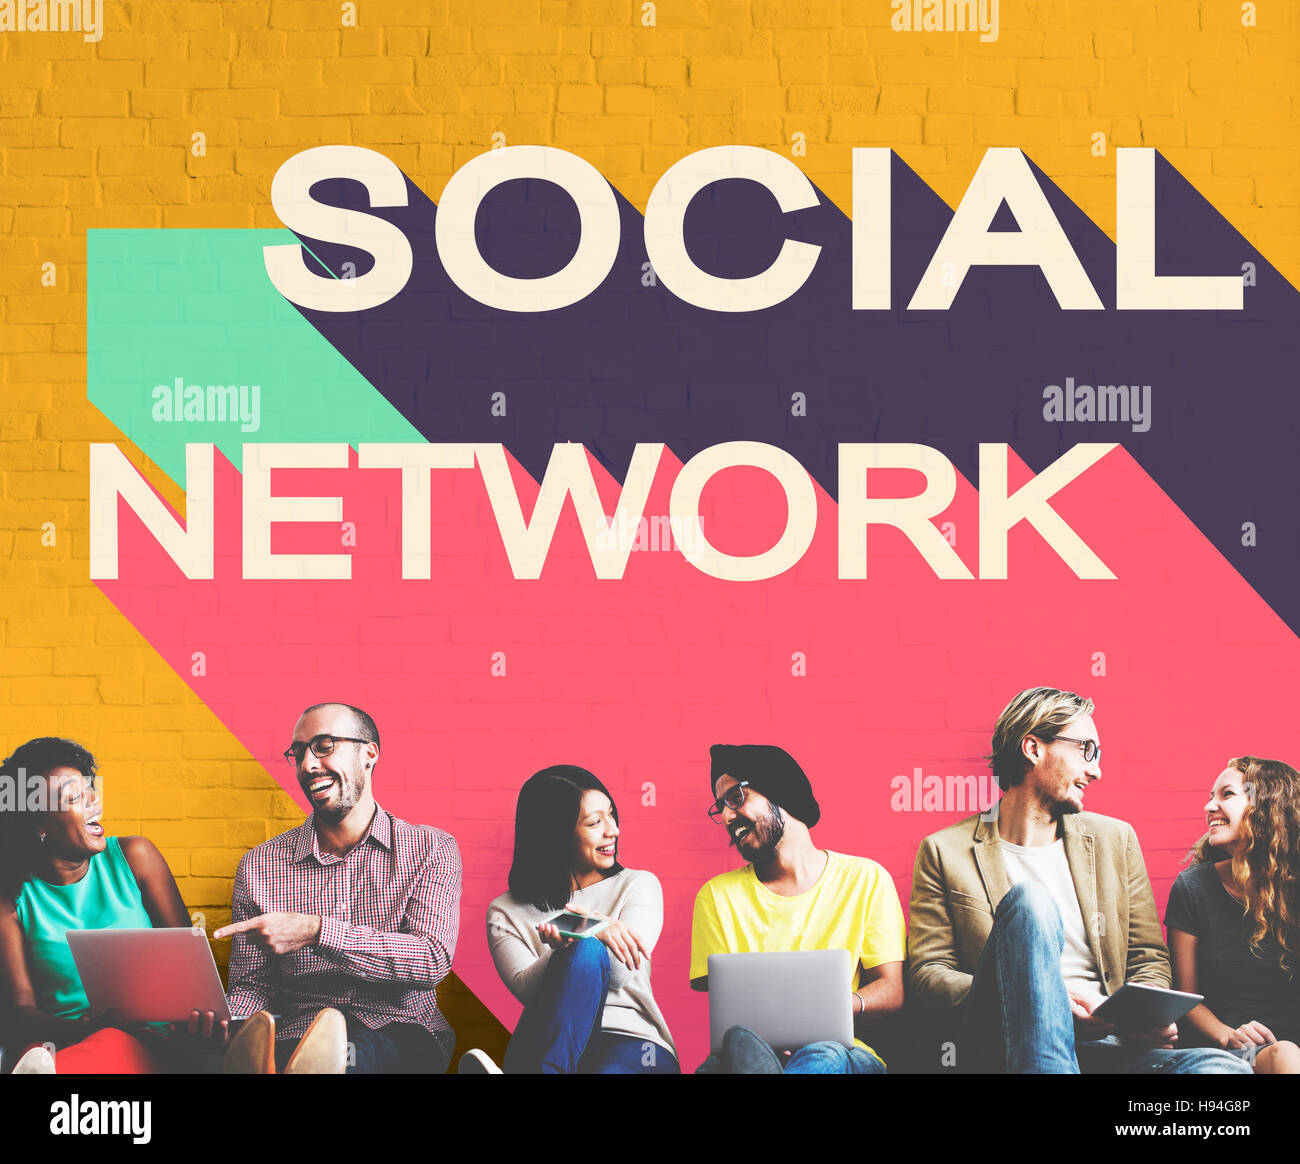 Social Media Network Community Connection Chat Concept Stock Photo